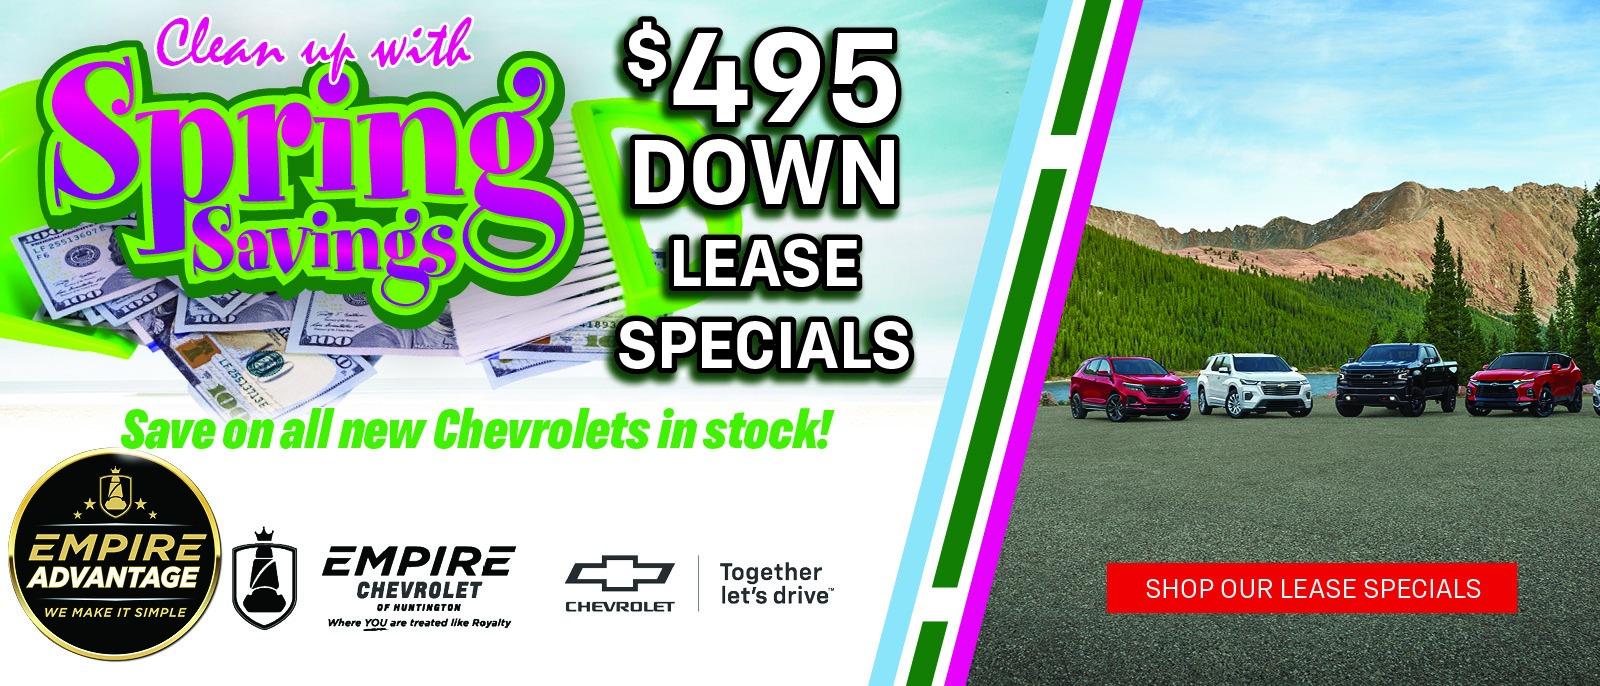 $495 Down Lease Specials